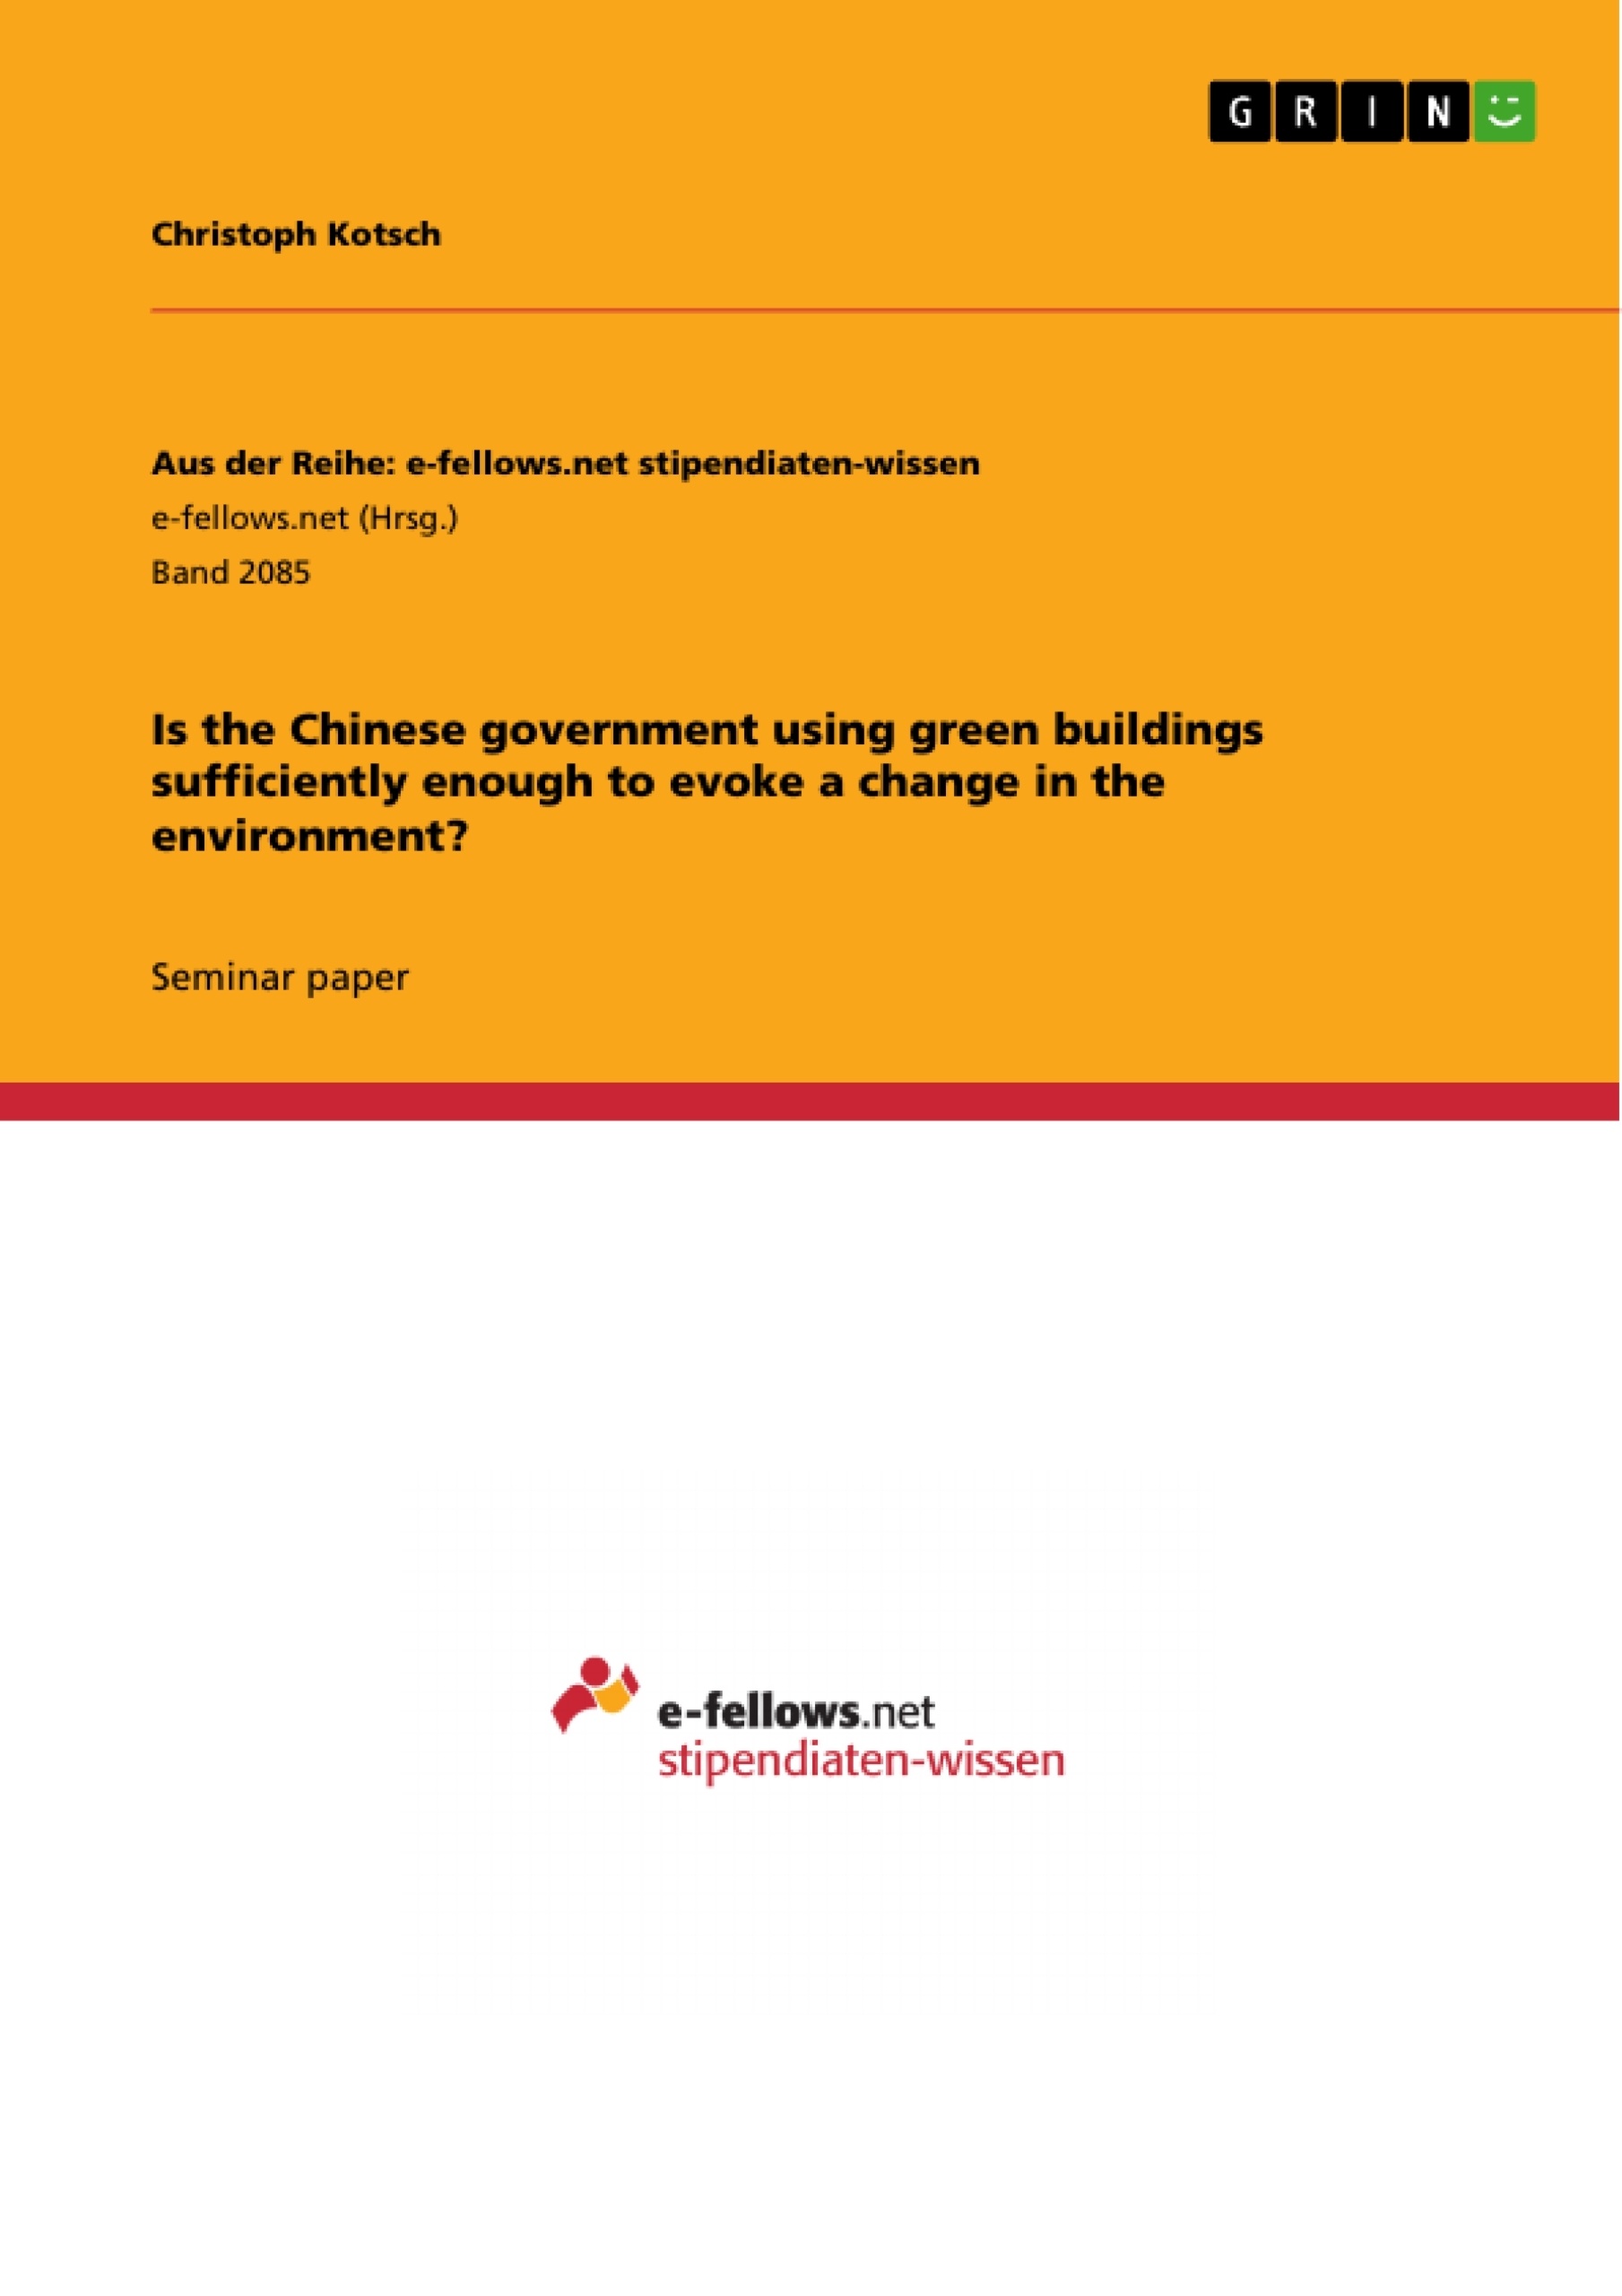 Título: Is the Chinese government using green buildings sufficiently enough to evoke a change in the environment?